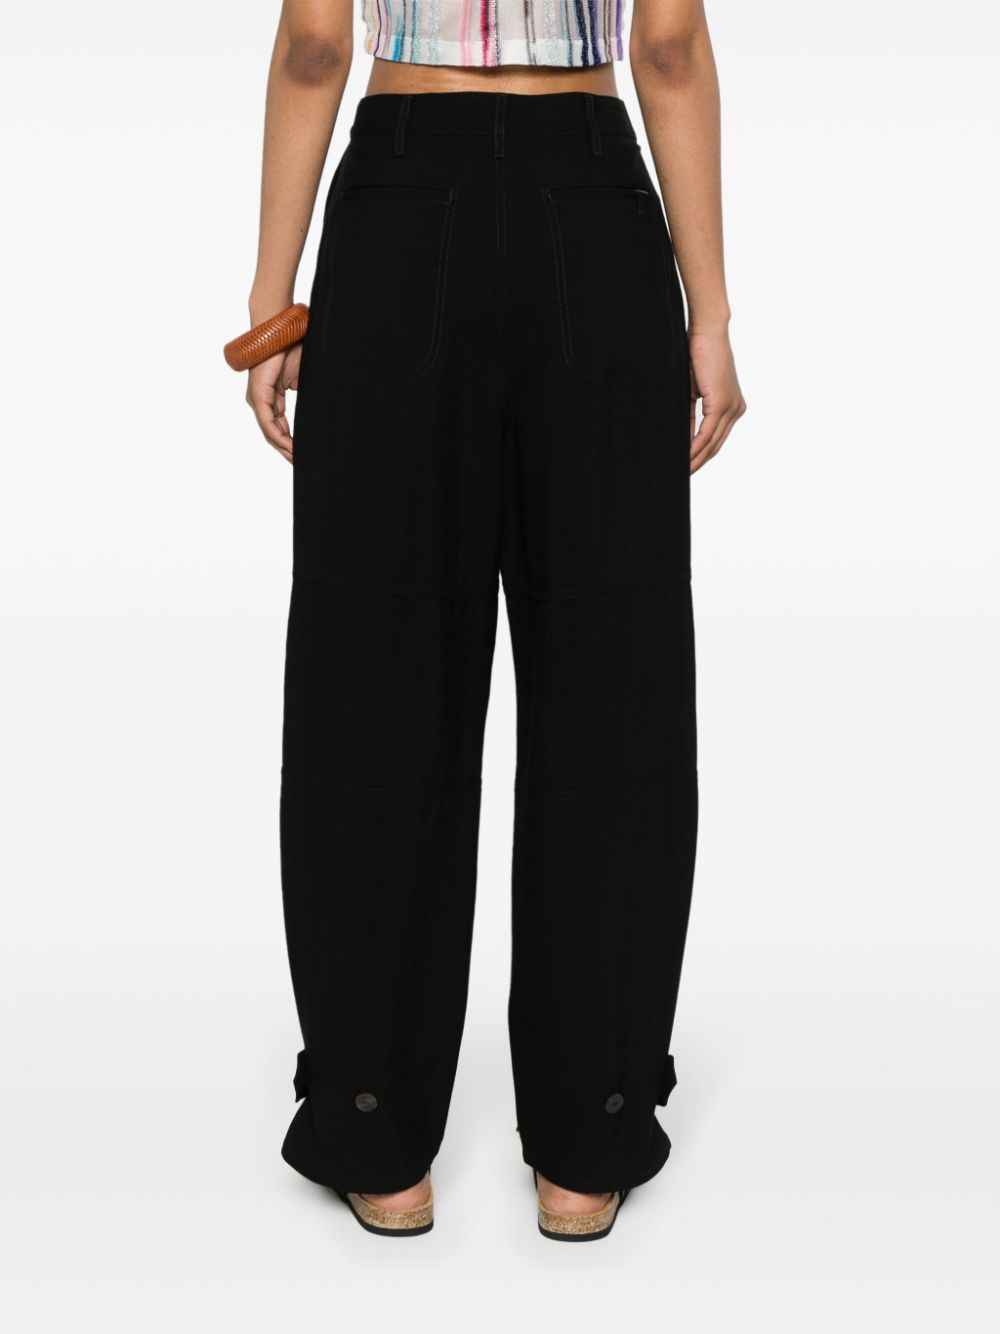 Loewe Paula's Ibiza LOEWE PAULA'S IBIZA- Linen Blend Cargo Trousers